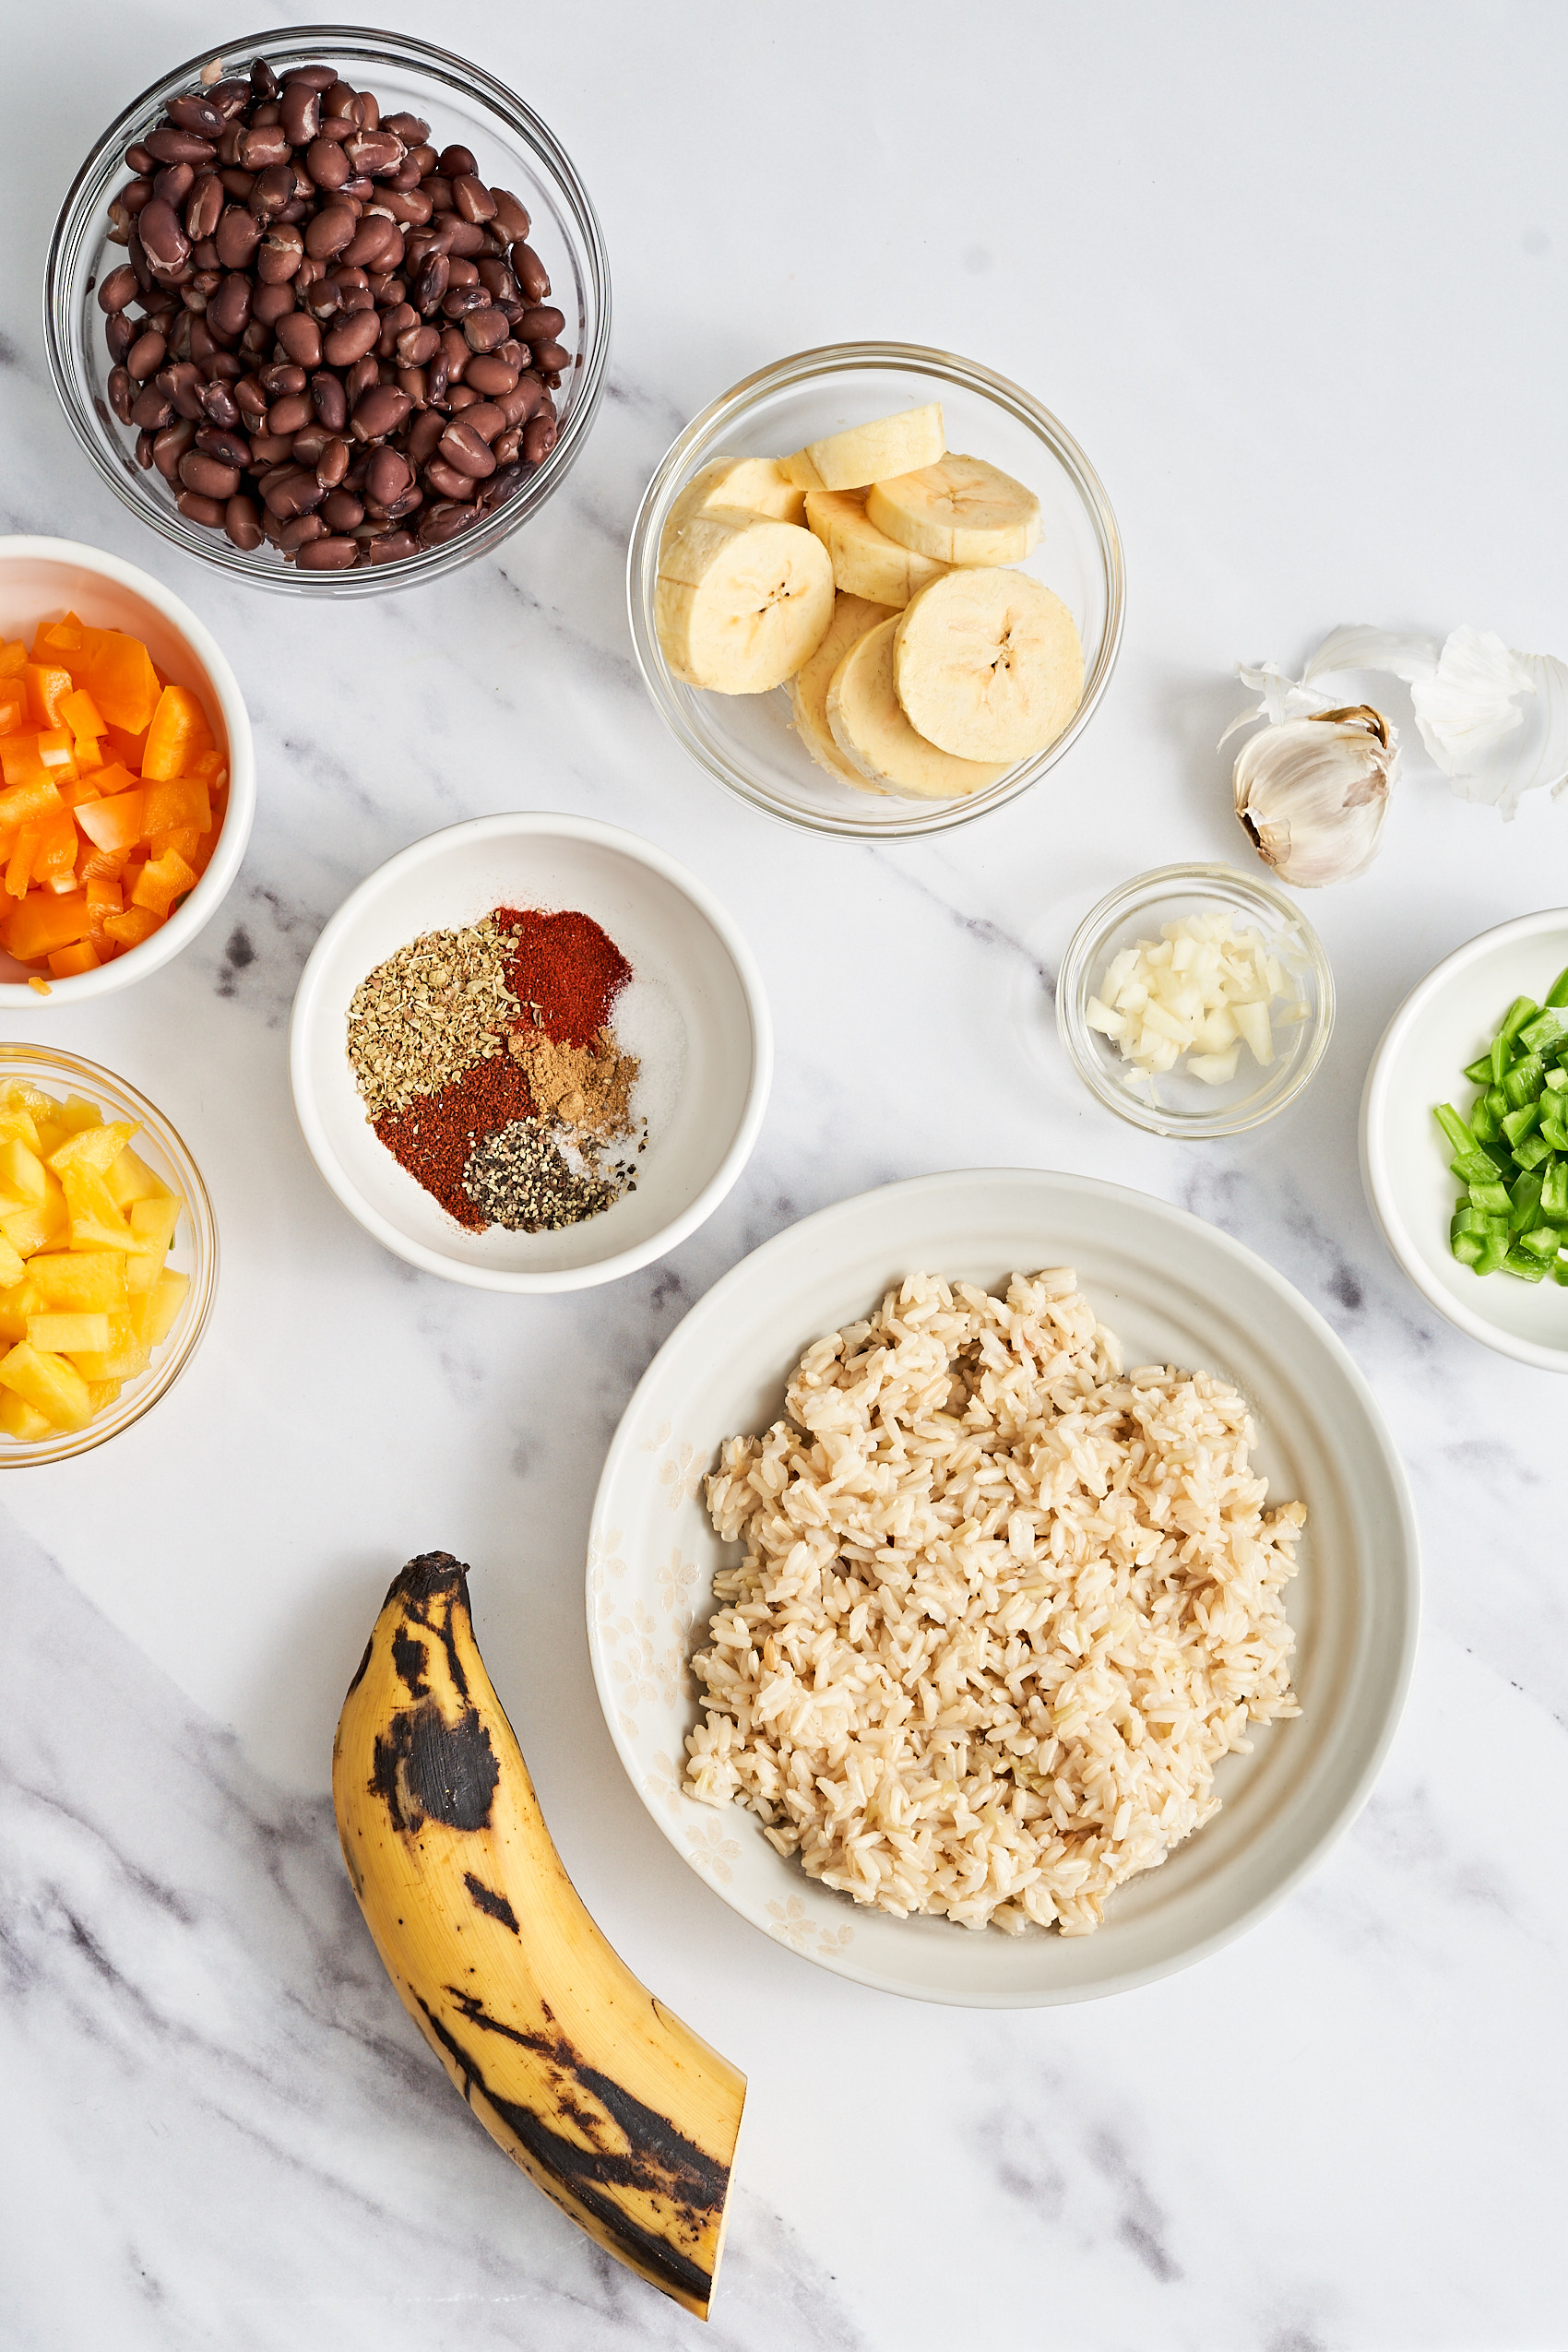 a collection of ingredients arranged on a countertop including a bowl of sliced plantains, a whole plantain, a bowl of rice, chopped green peppers, a bowl of spices, chopped mango and black beans